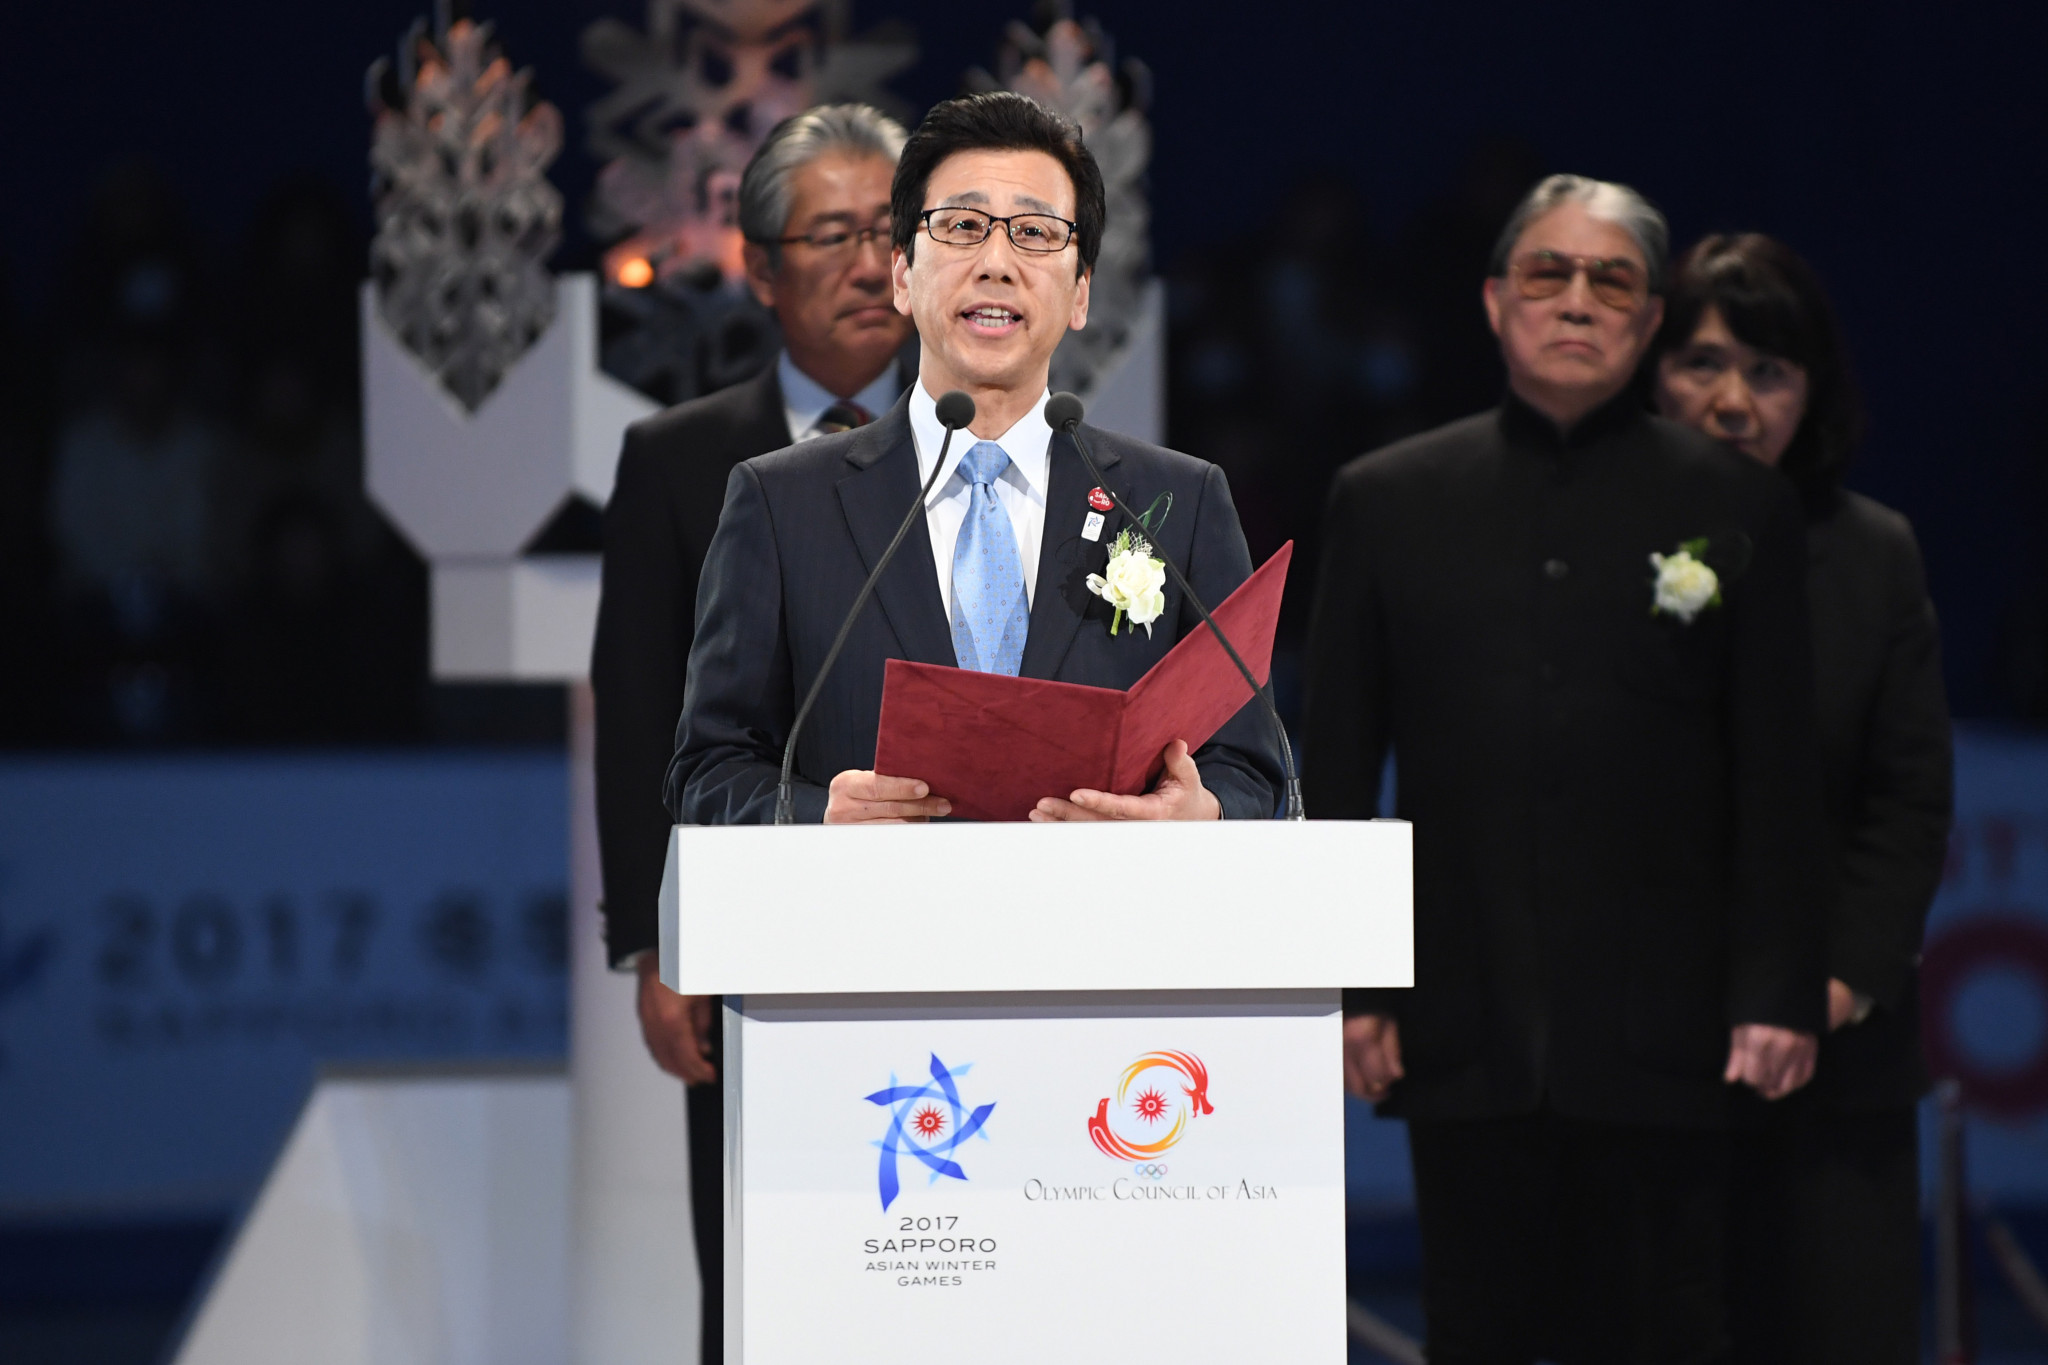 Sapporo Mayor Katsuhiro Akimoto pictured speaking at the Closing Ceremony of last year's Asian Winter Games ©Getty Images